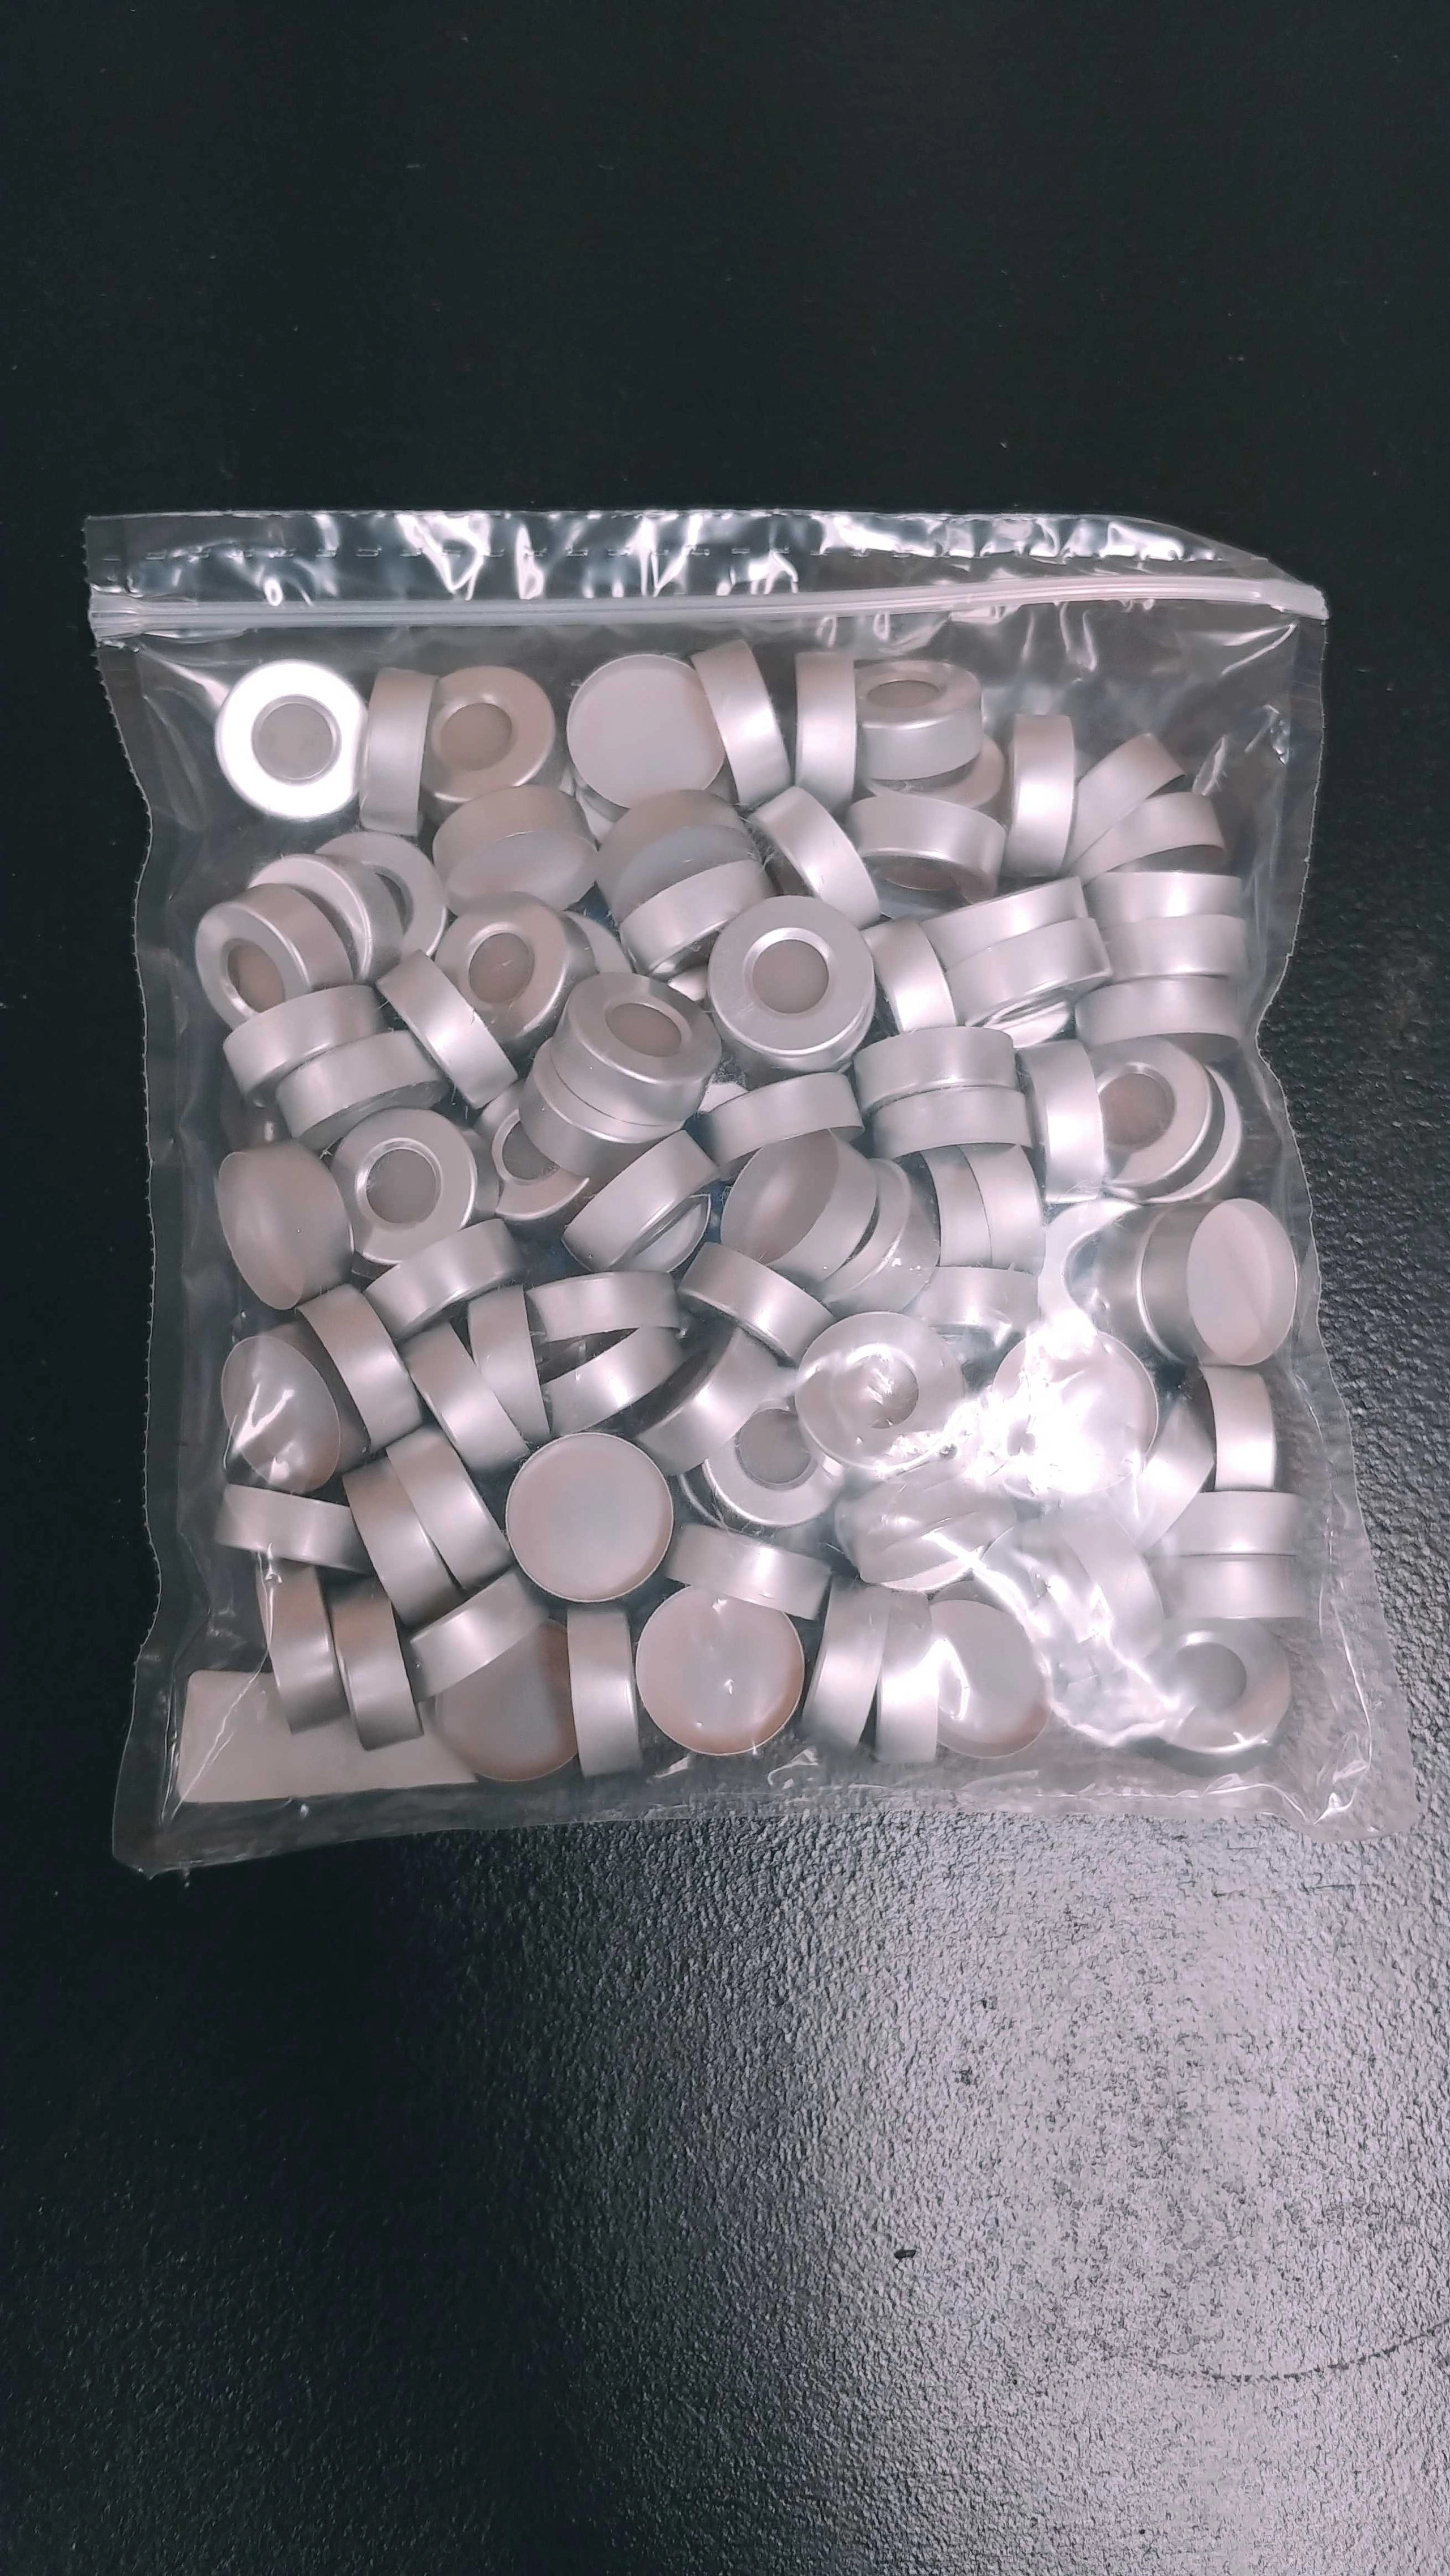 Aluminum Crimp Cap - PTFE/Clear Silicone + Aluminum Cap with Hole,  Suitable for Karl Fischer (KF) Ovens, Qty 1000